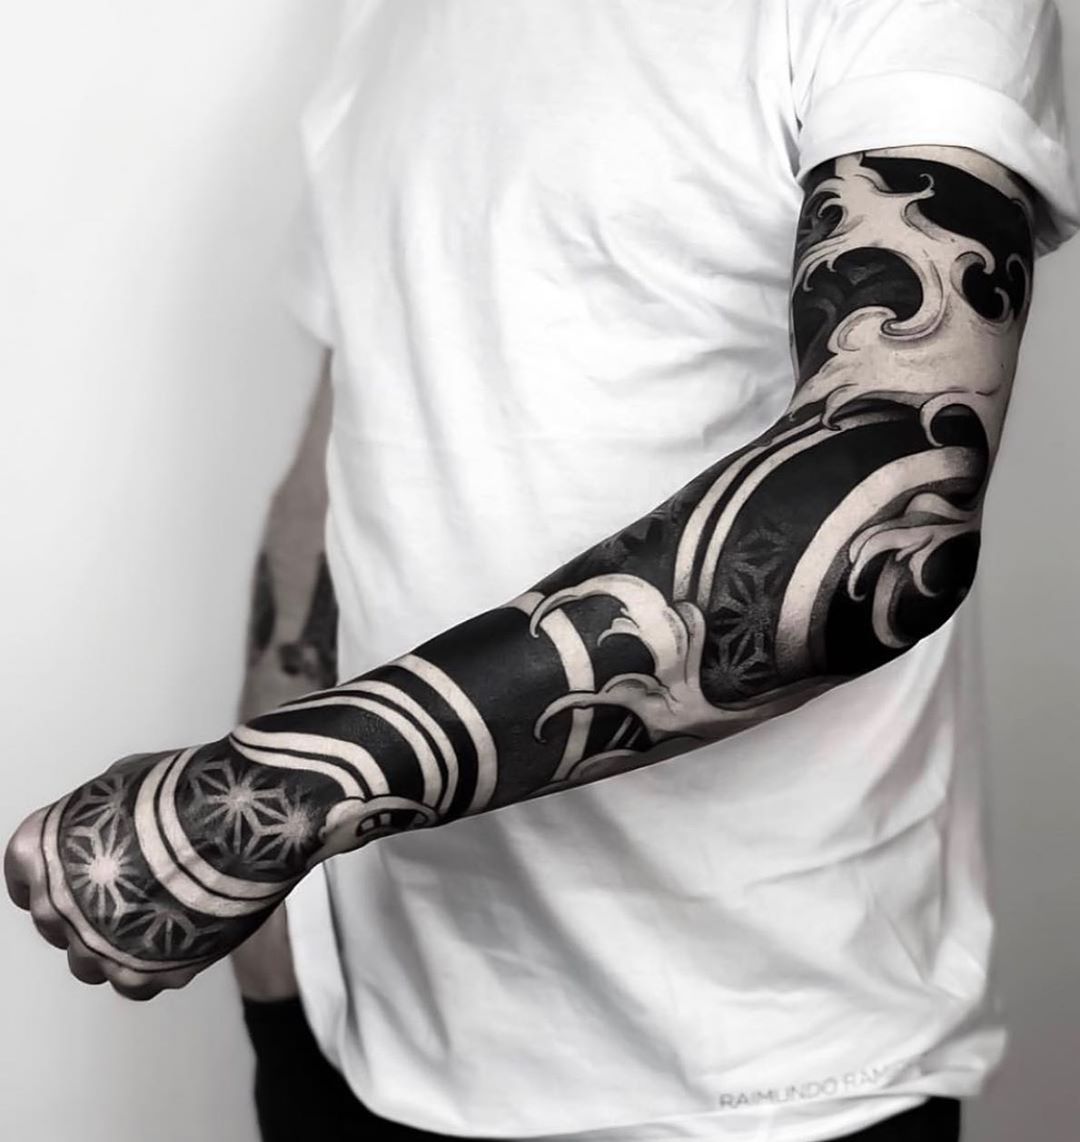 Do Tattoo Sleeves Need a Theme The Best Full Sleeve Tattoo Theme Ideas   Freehand